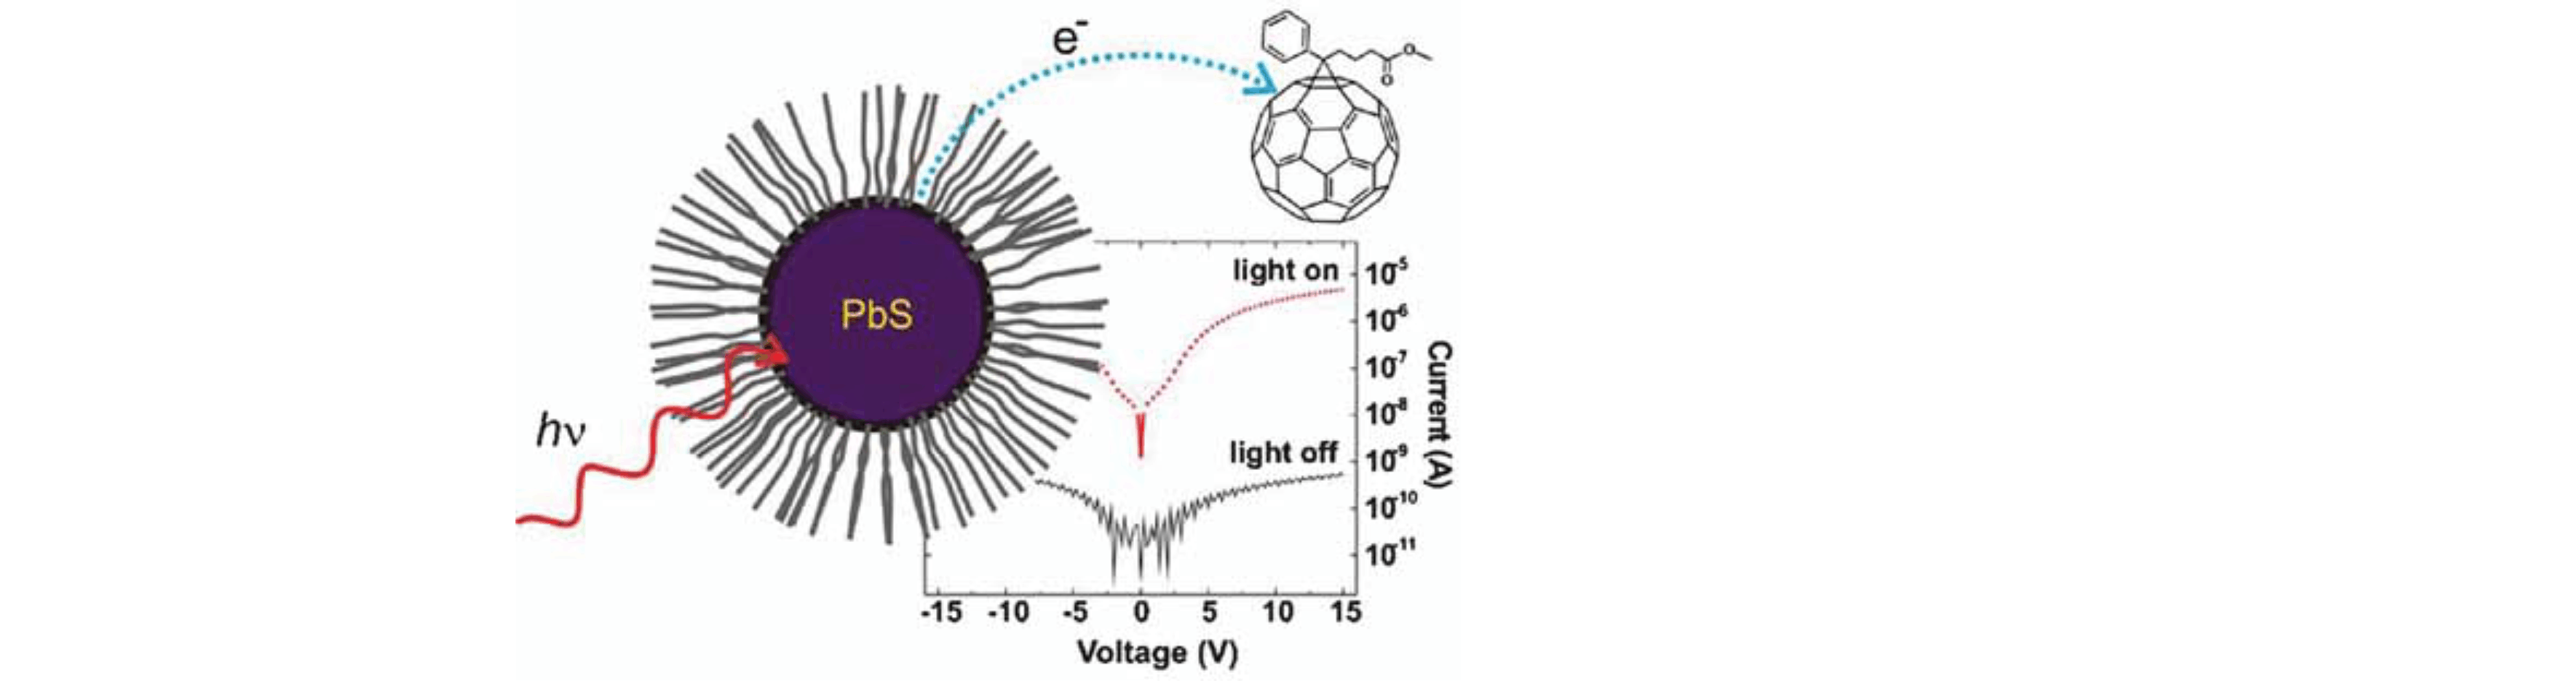 Solution-processable Near-IR photodetectors based on electron transfer from PbS nanocrystals to fullerene derivatives